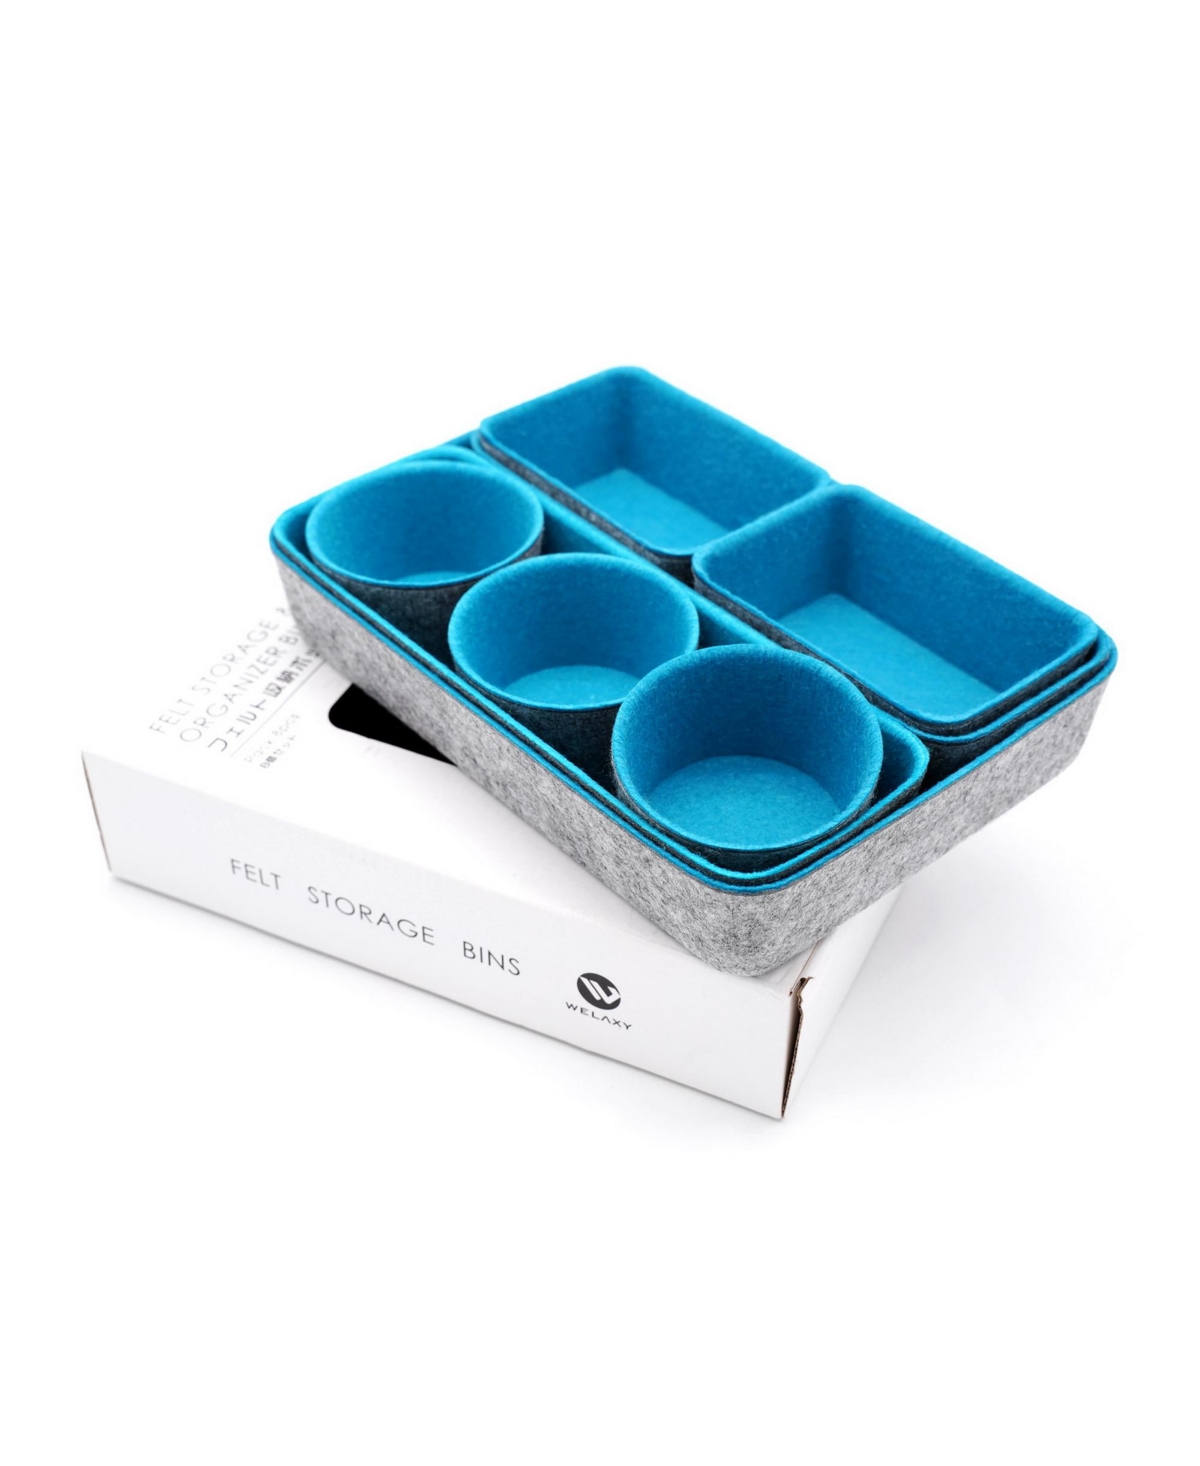 Welaxy 8 Piece Felt Drawer Organizer Set With Round Cups And Trays In Turquoise